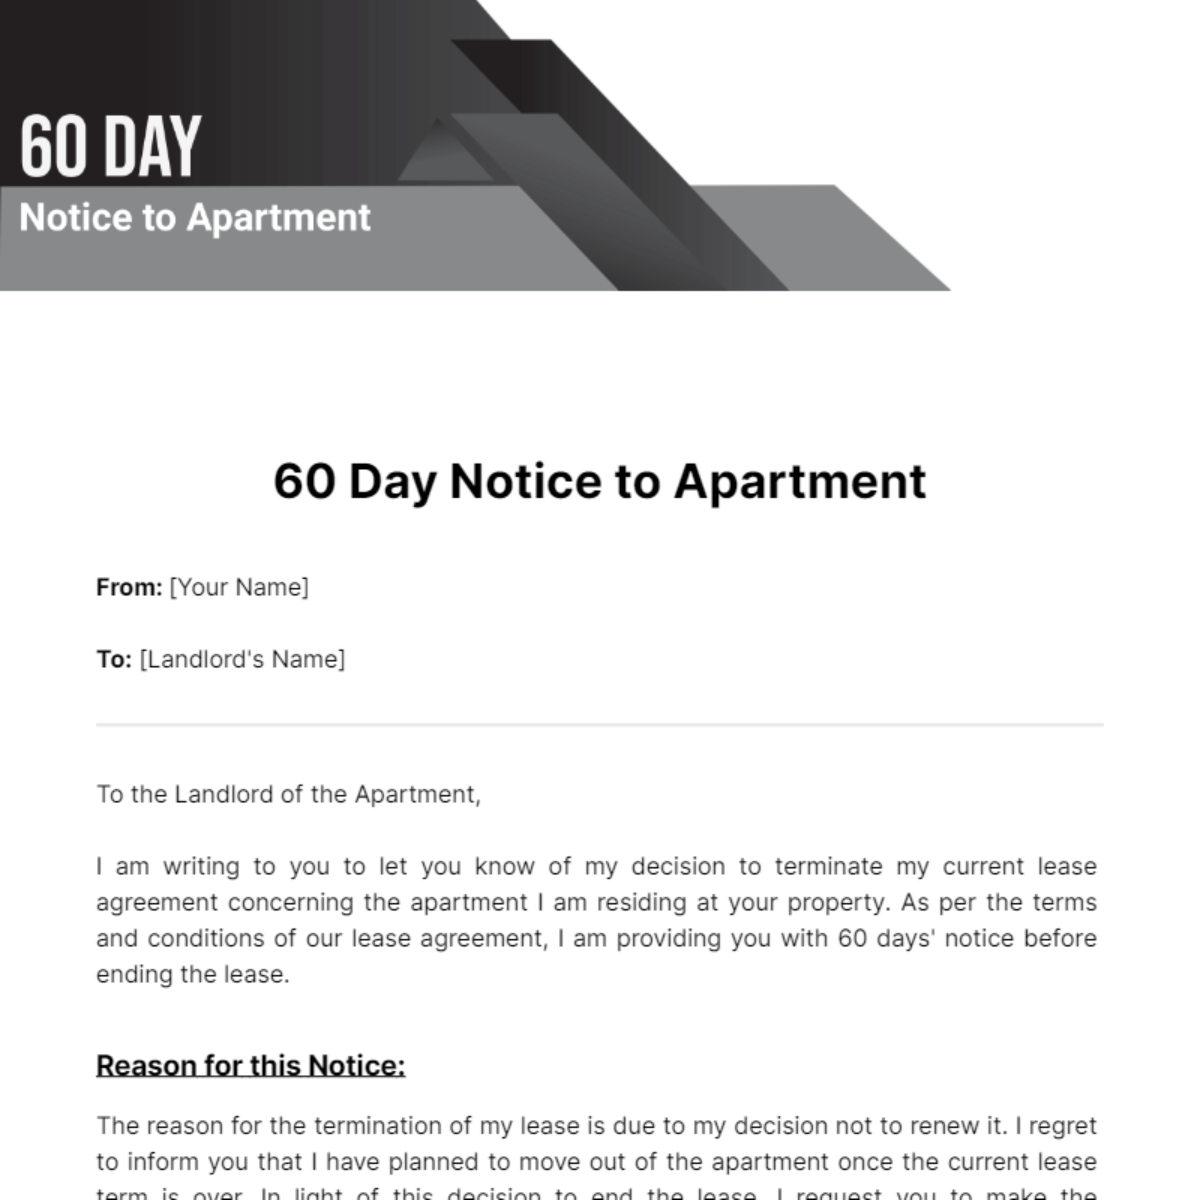 60 Day Notice to Apartment Template